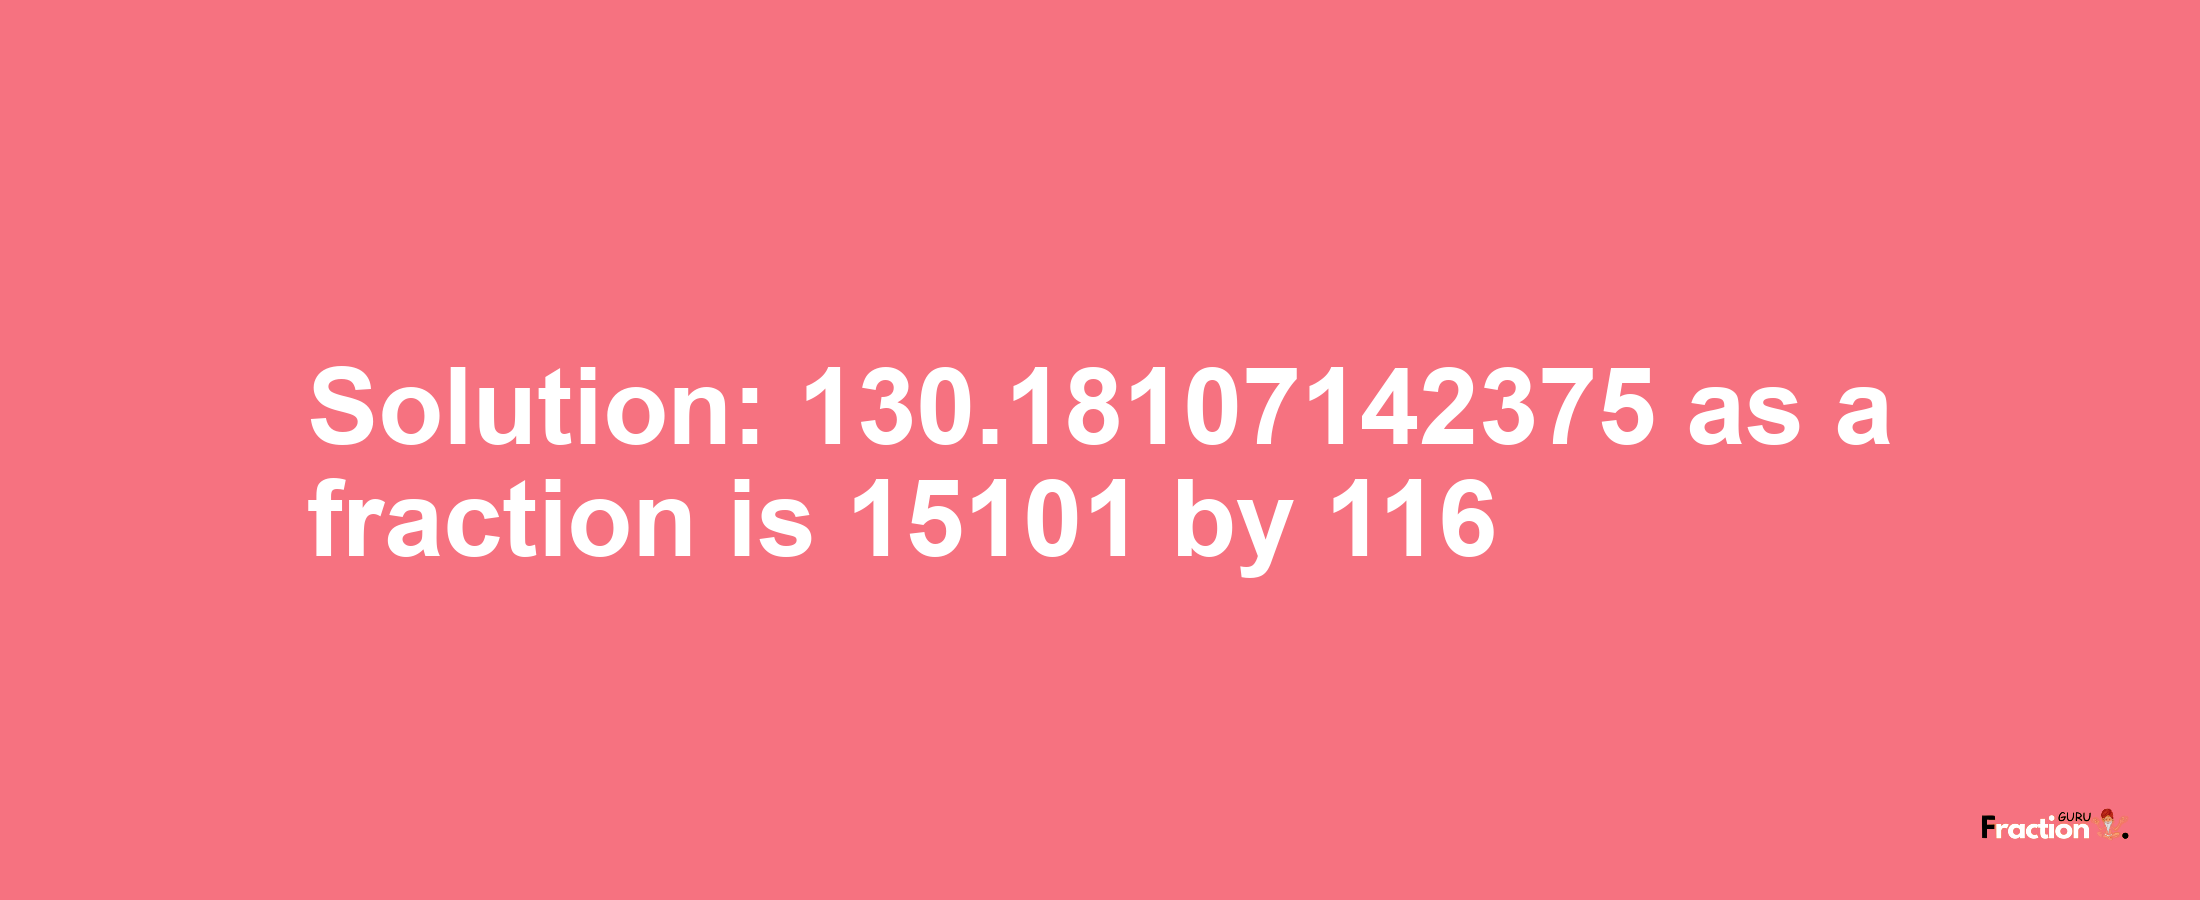 Solution:130.18107142375 as a fraction is 15101/116